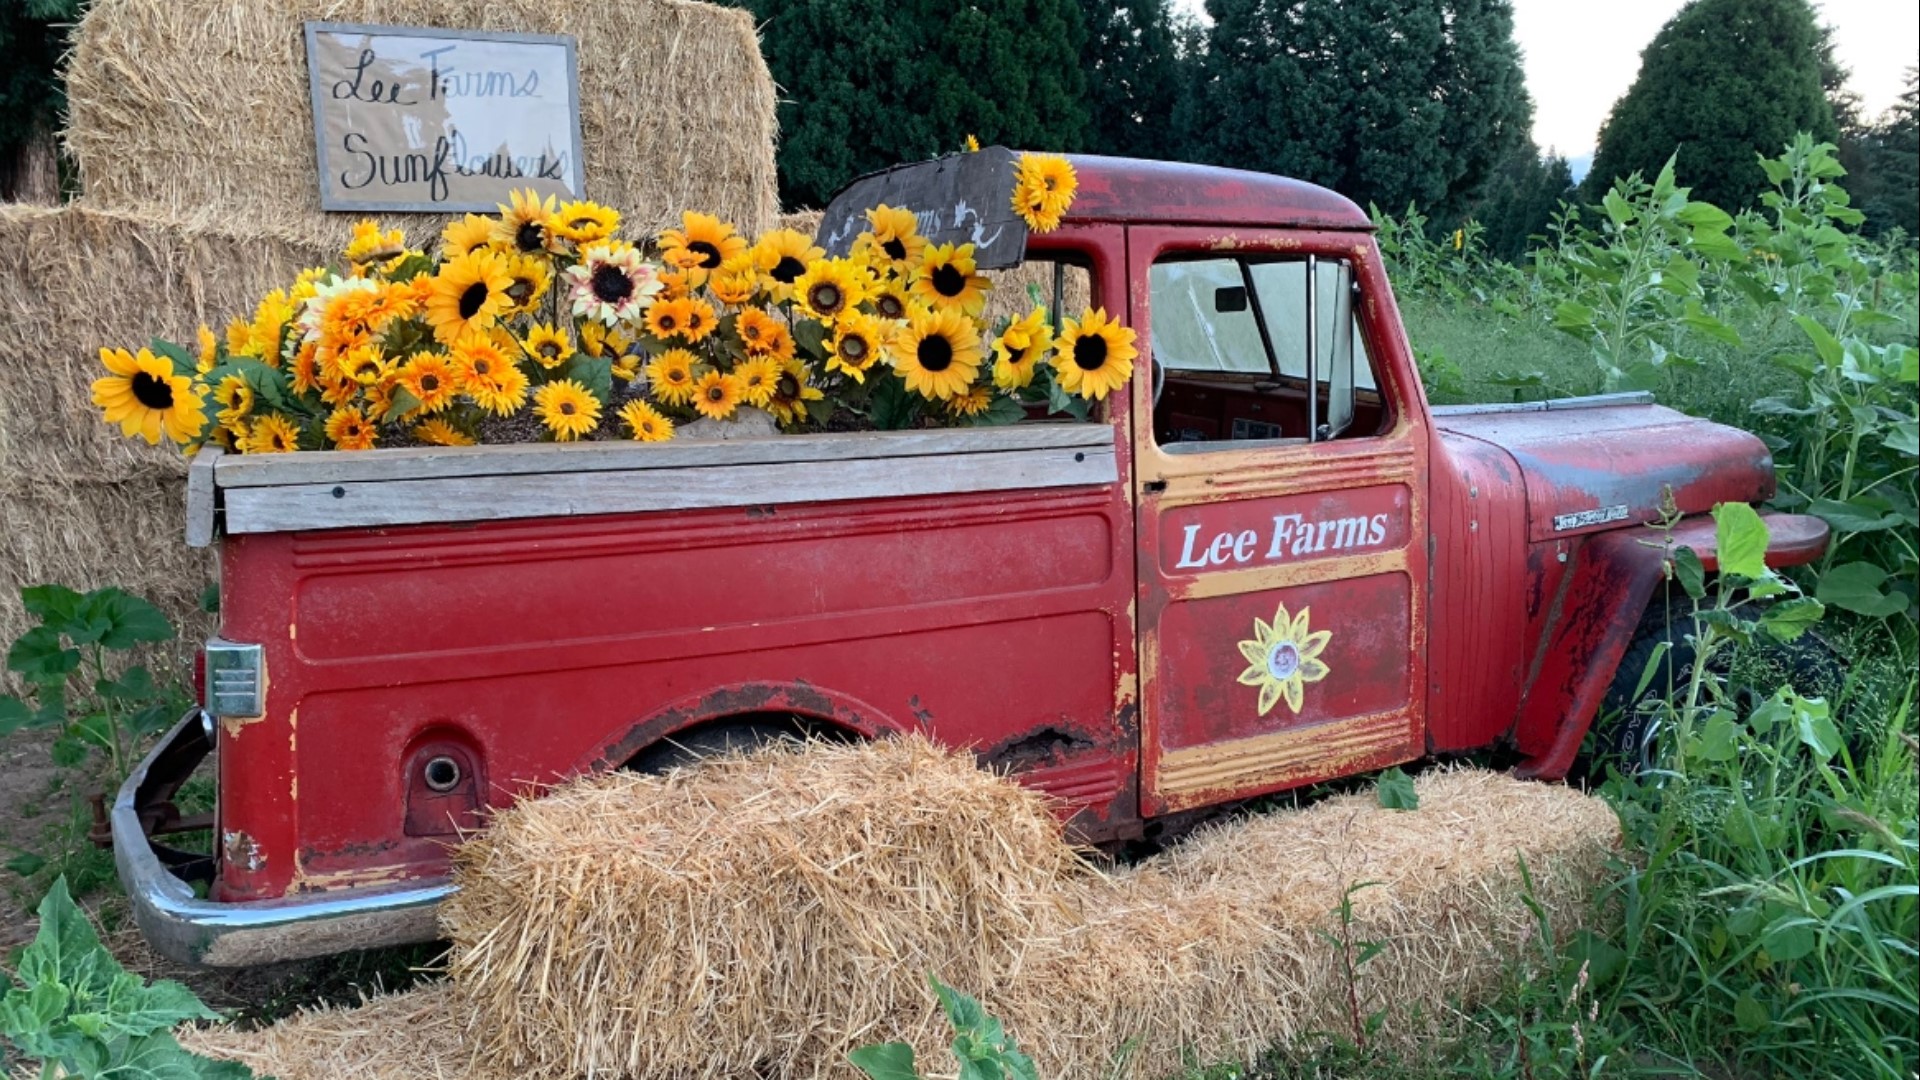 The Sunflower Festival at Lee Farms runs Aug. 19-Sept. 4. Visitors can take photos, enjoy food and drinks, live music and other family friendly entertainment